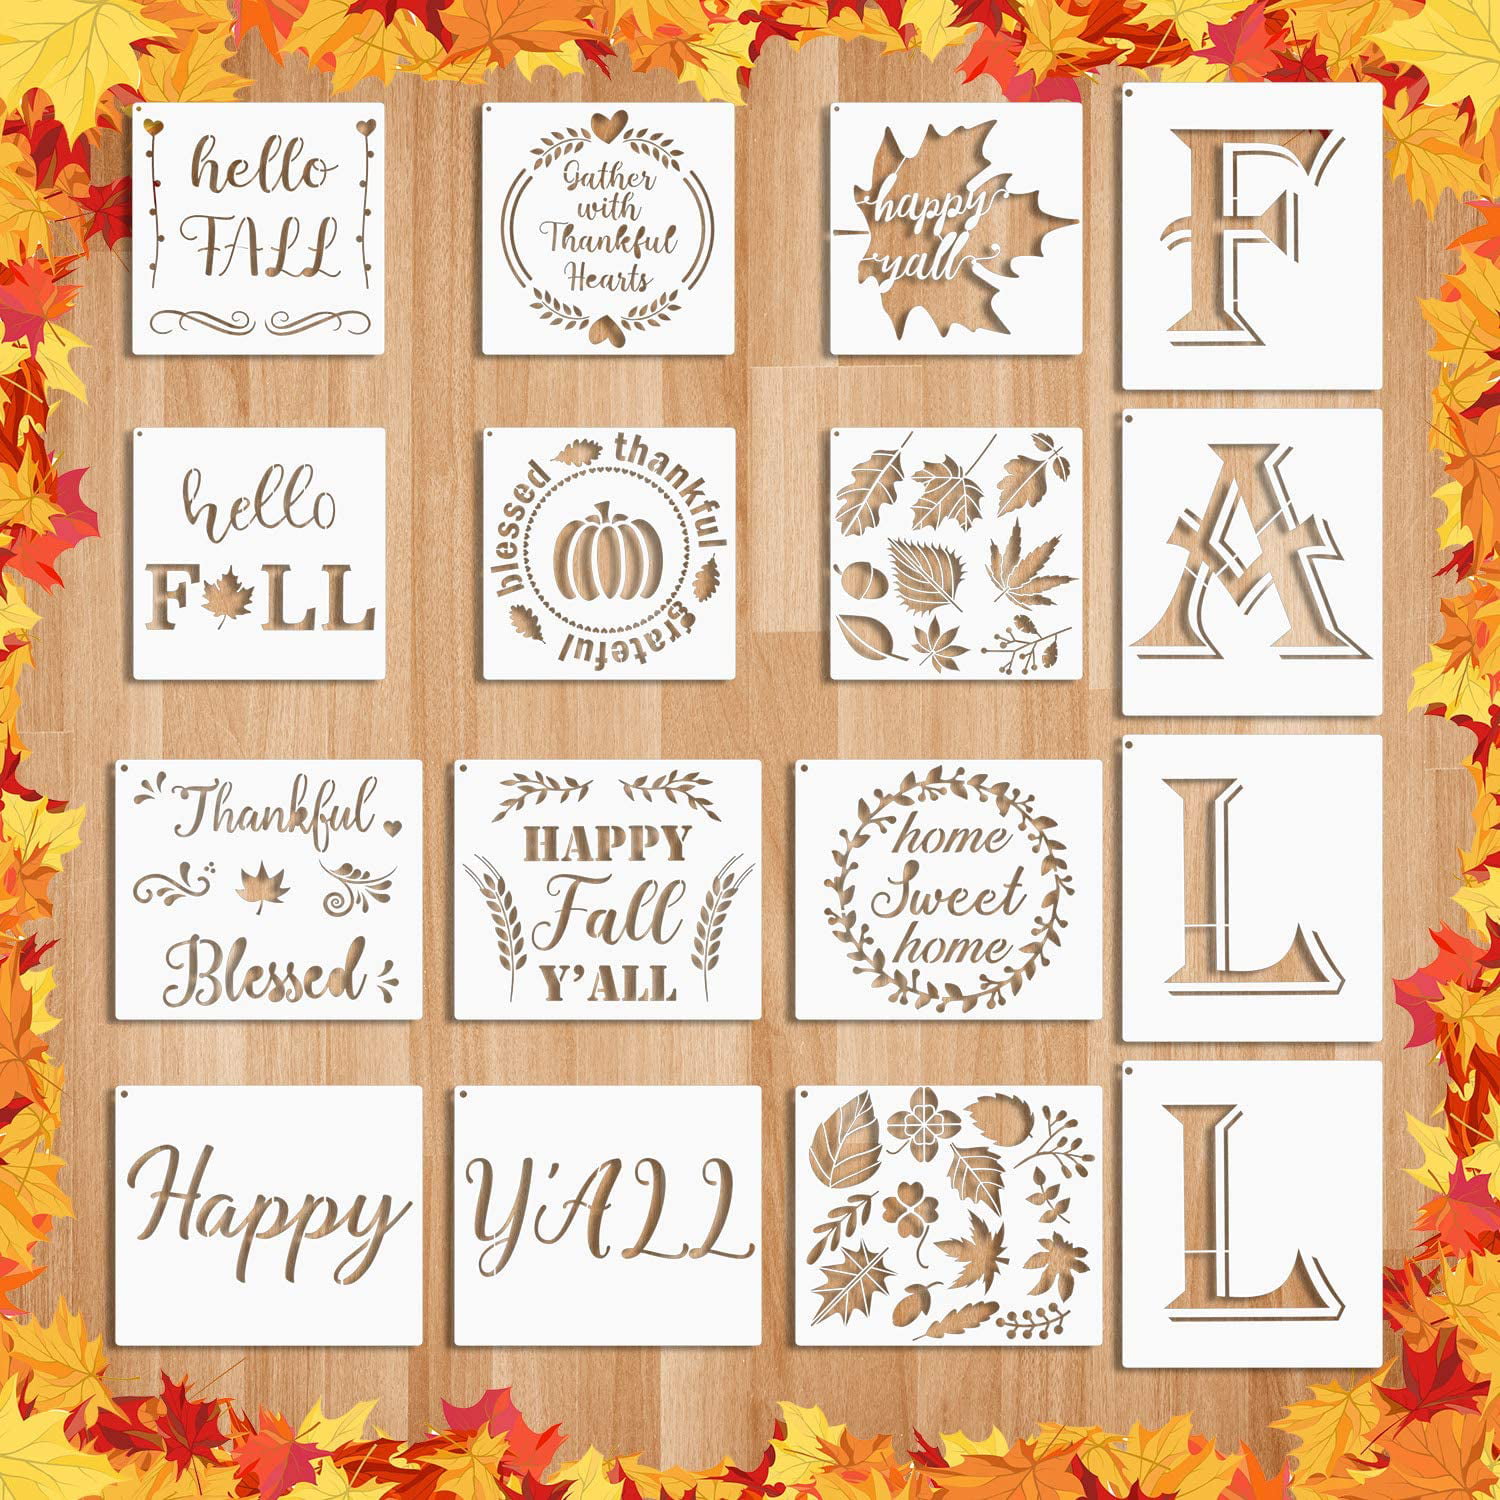 16 Pieces Happy Fall Stencil Kit Thanksgiving Fall Porch Stencil Pumpkin Maple Leaf Stencils Autumn Reusable Mylar Template Seasonal Stencils for Painting on Wood Wall Home Crafts Decor 